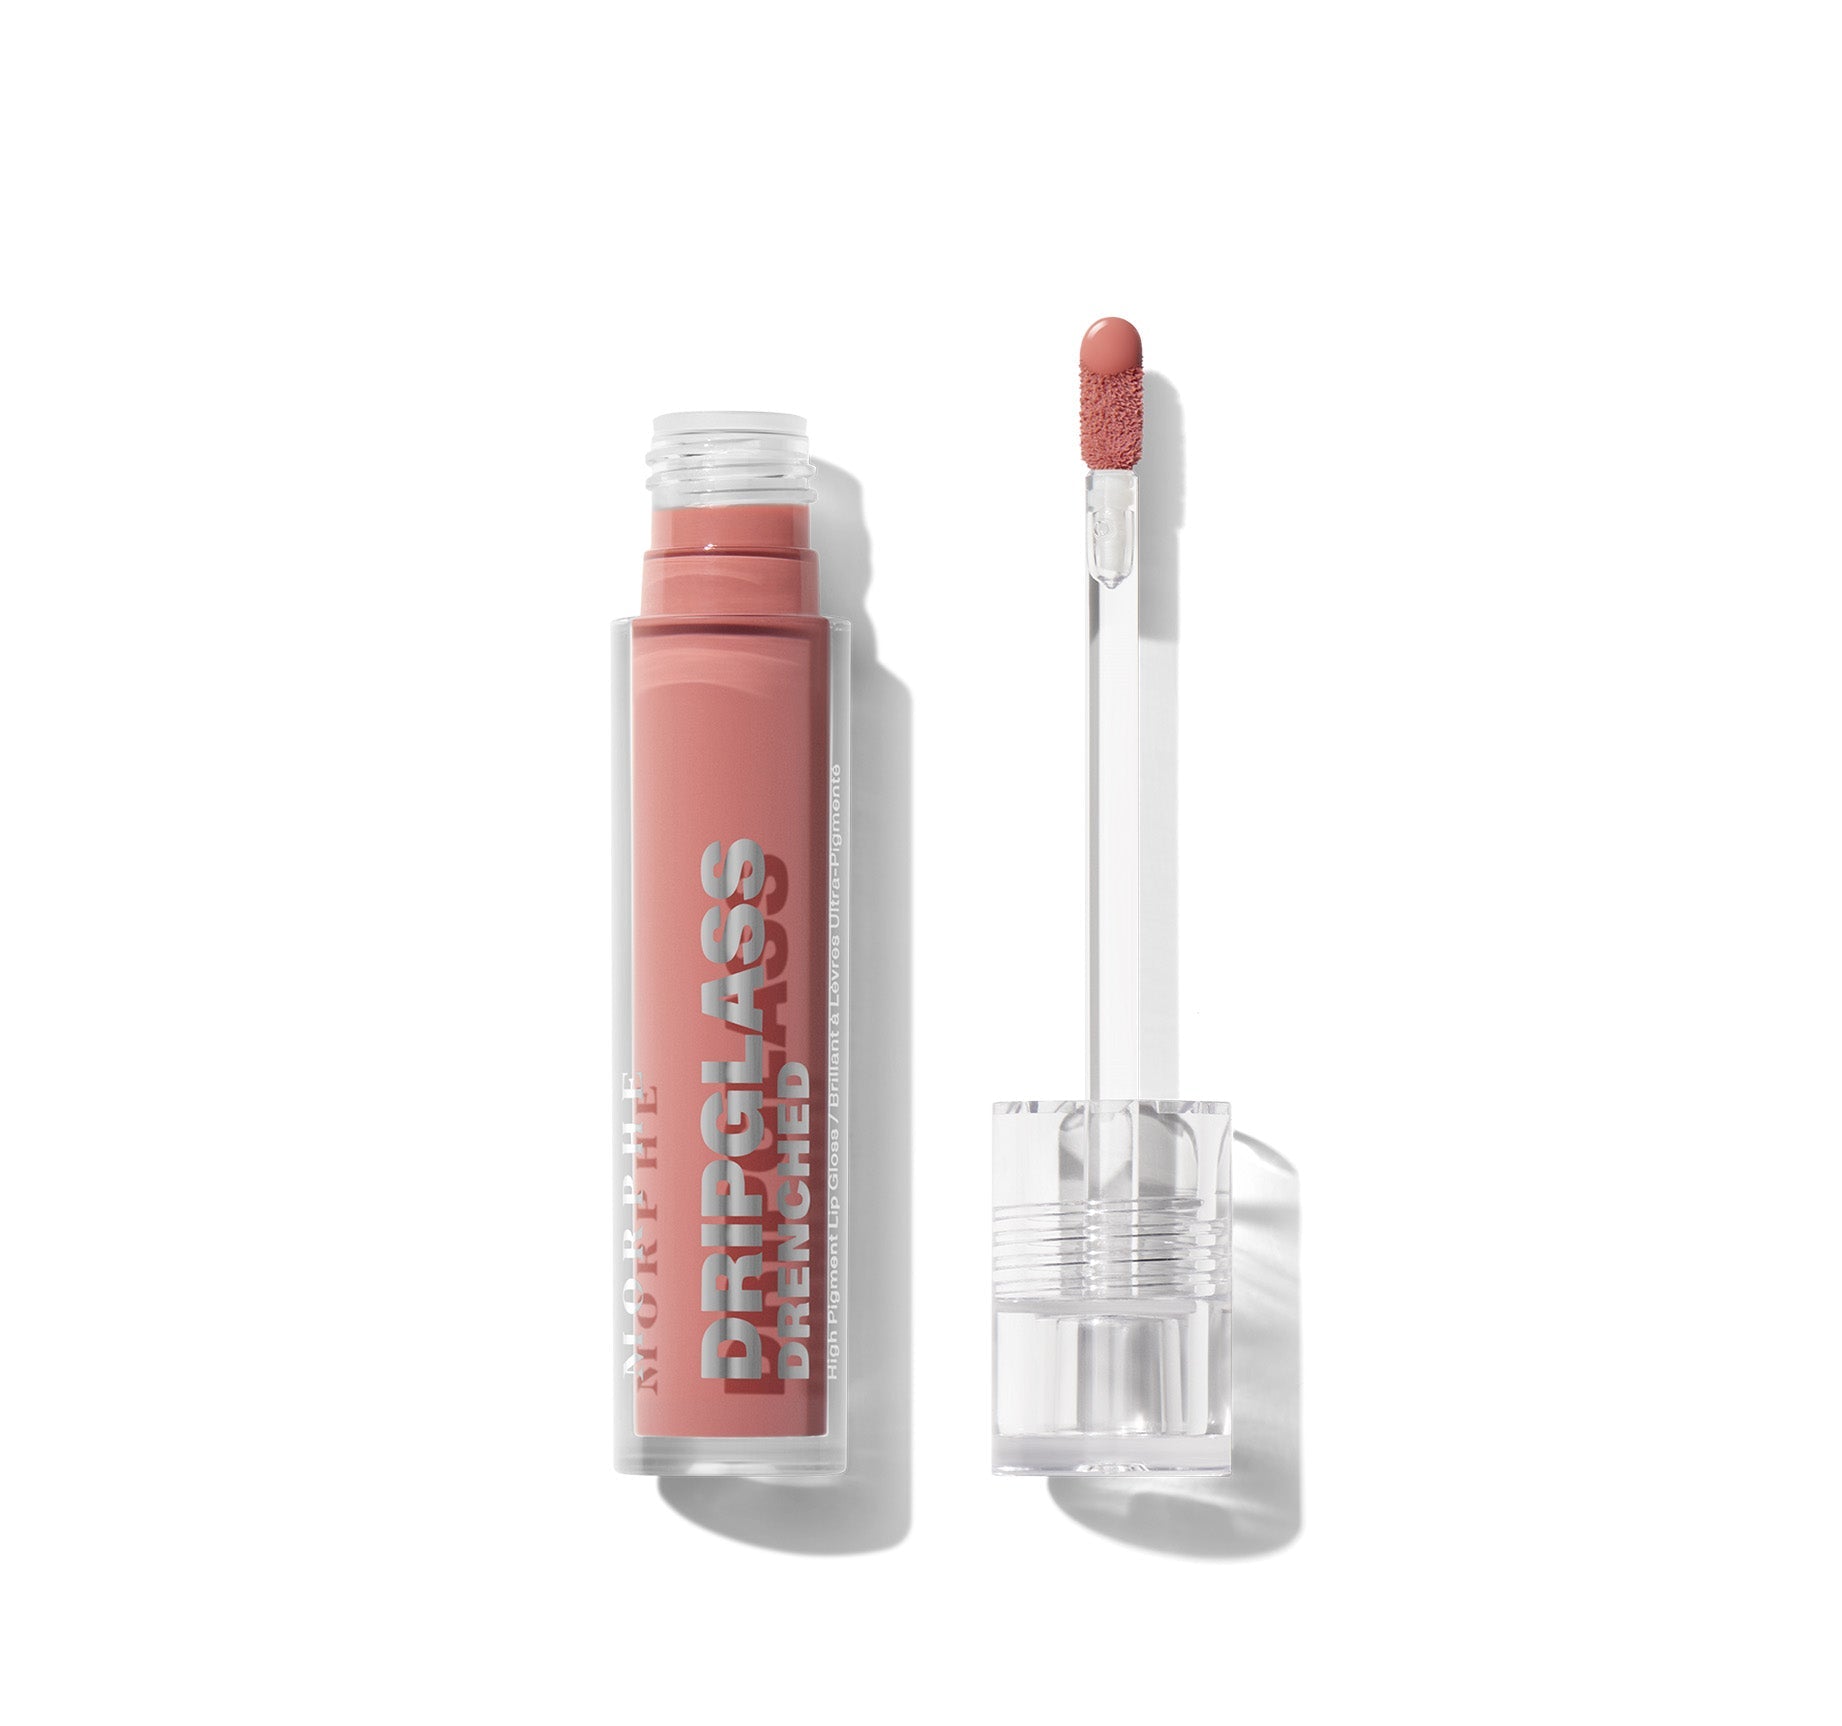 Dripglass Drenched High Pigment Lip Gloss - Wet Peach - Image 1